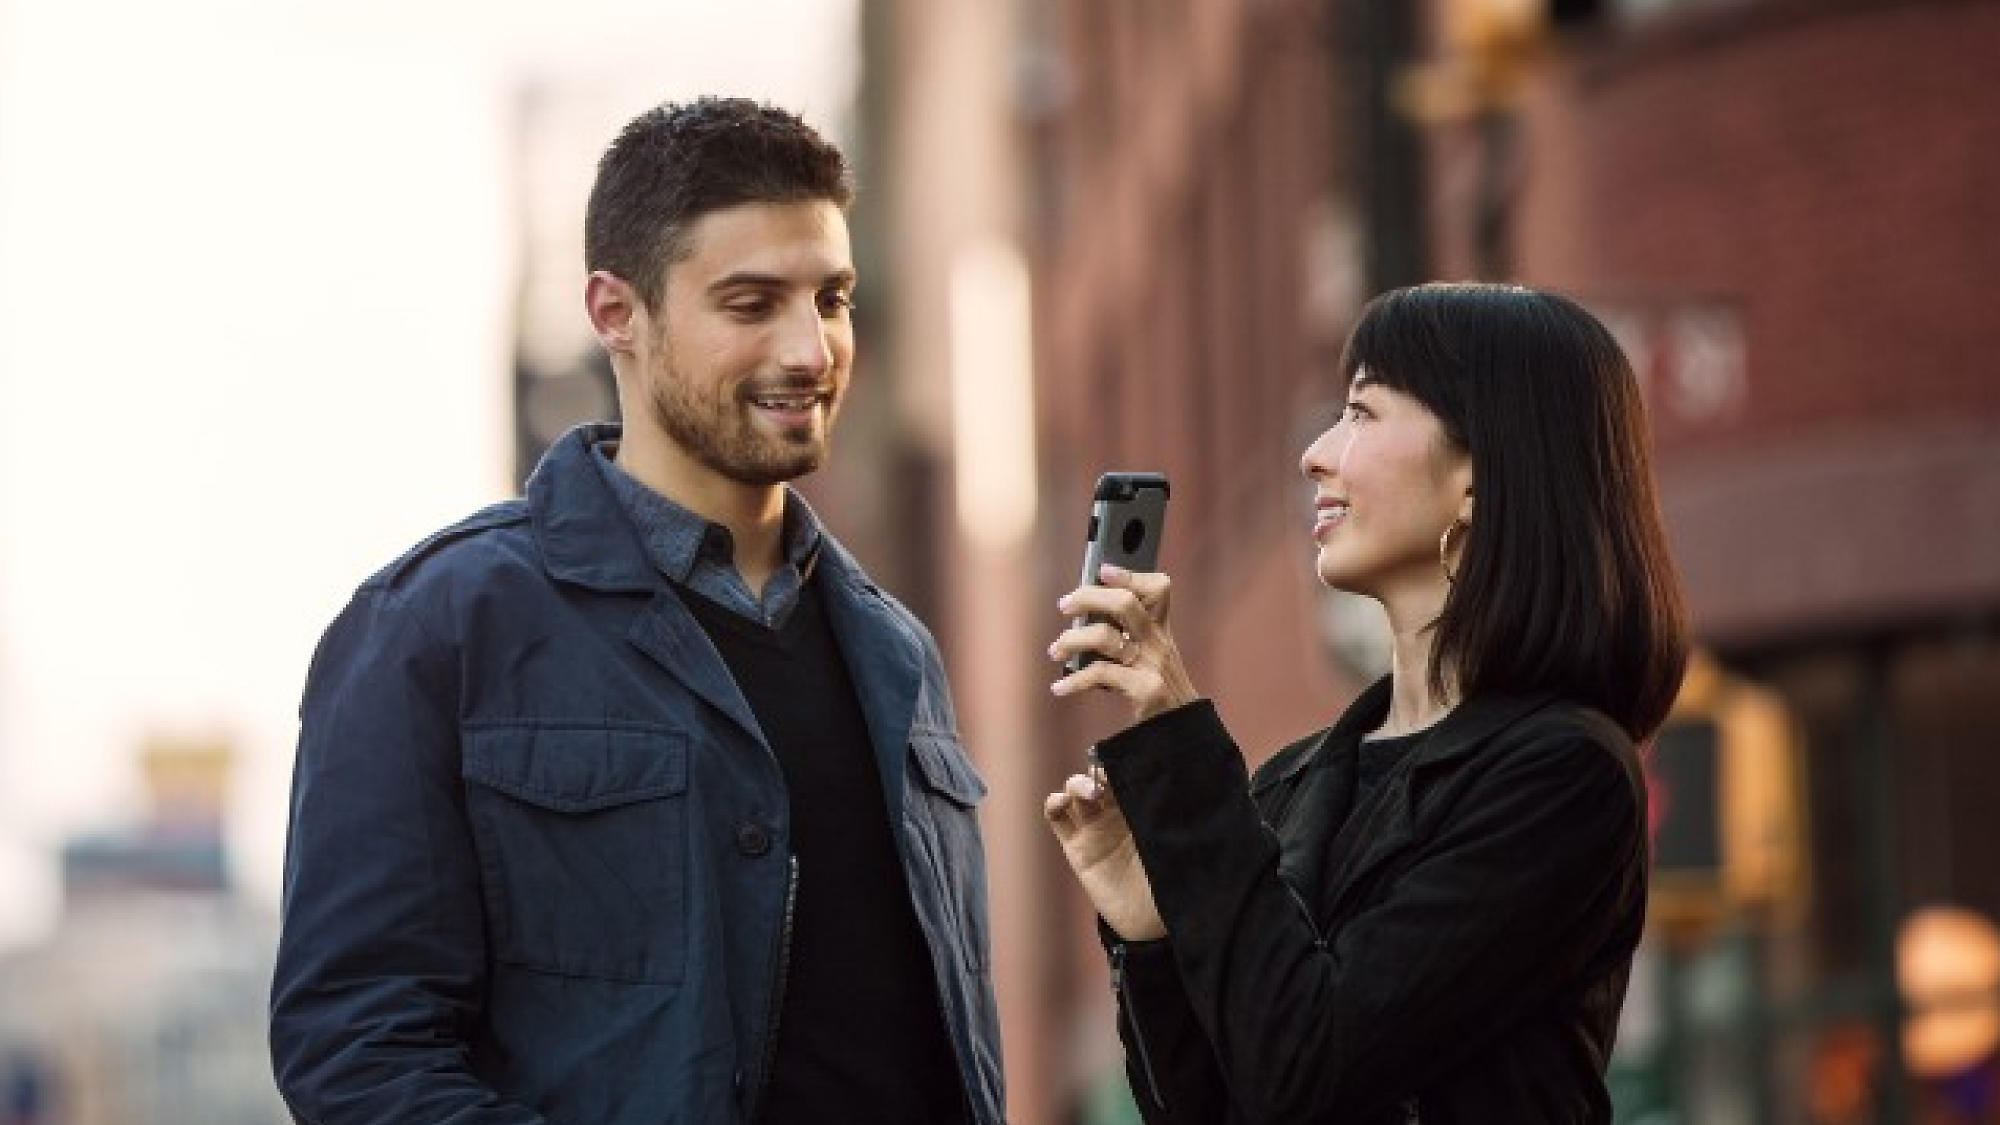 A woman holding a smartphone points it towards a man as they both stand on a city street, smiling and engaging in conversation.